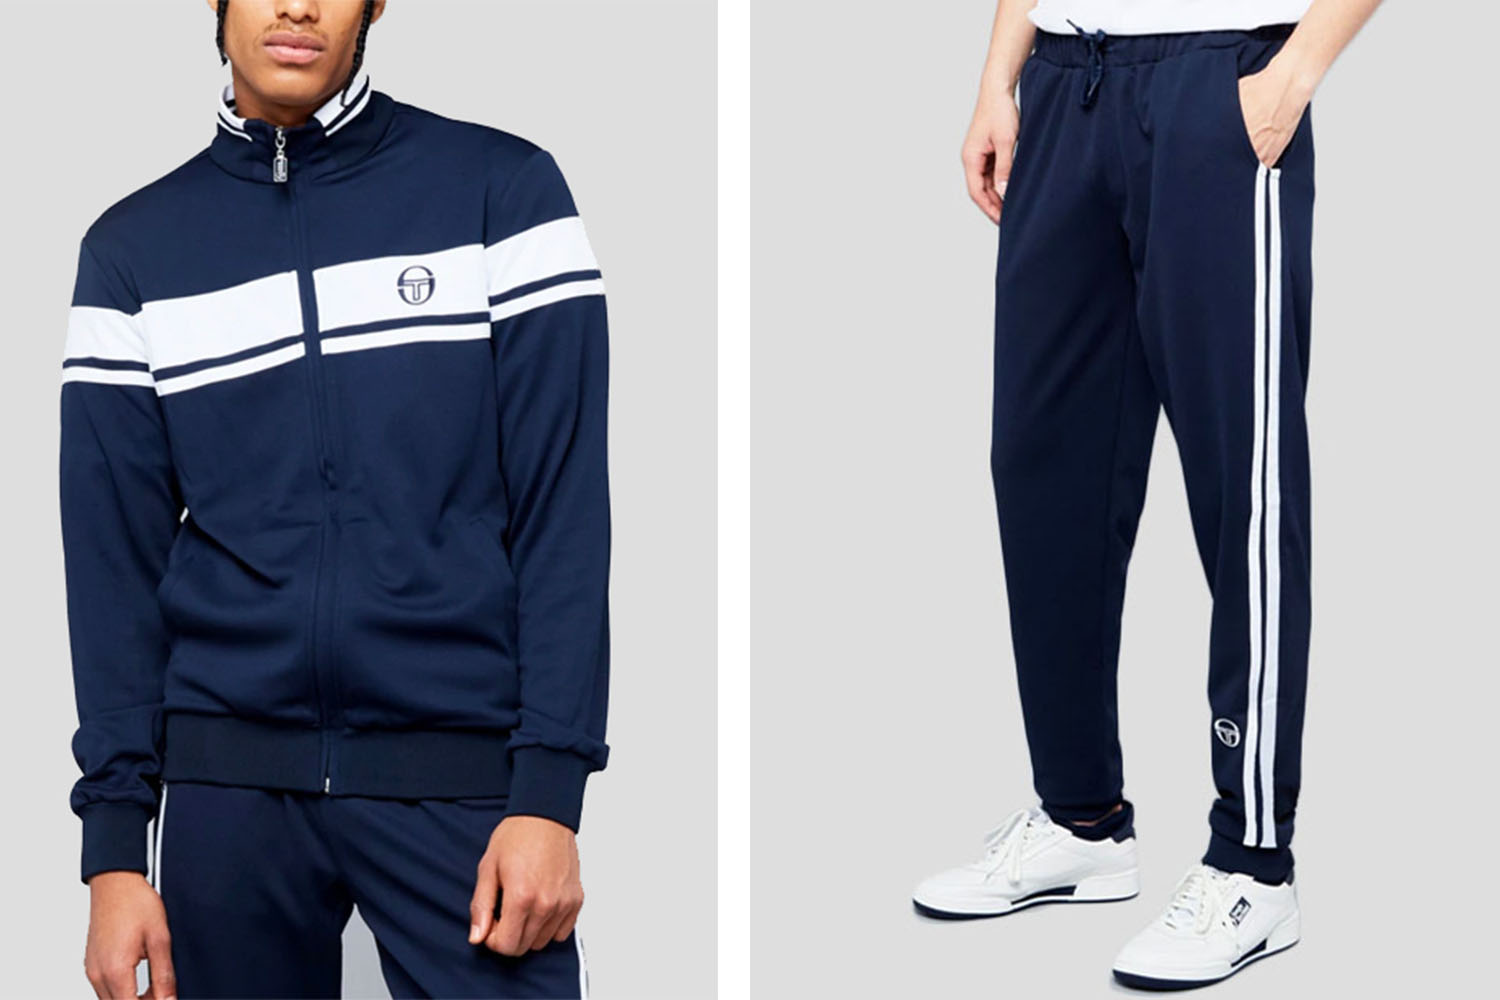 mile wile polo sweat suit